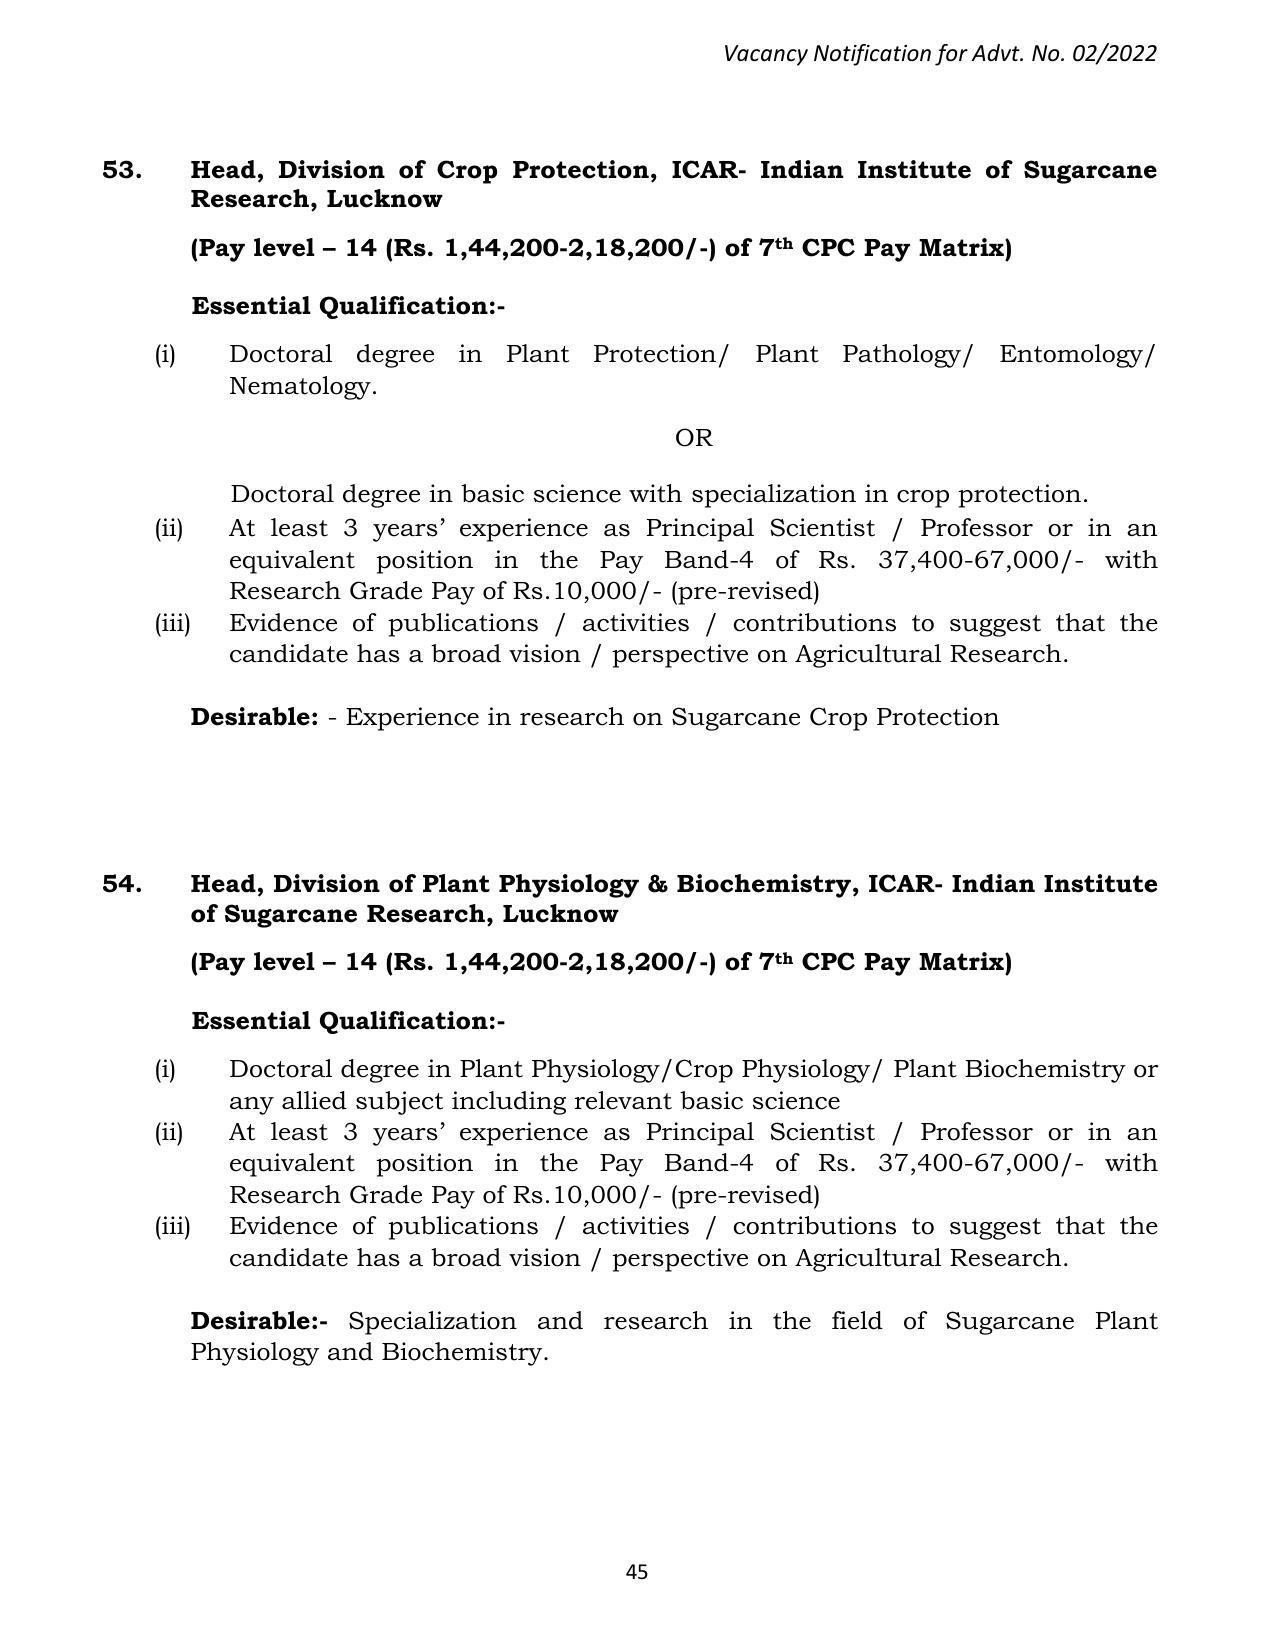 ASRB Non-Research Management Recruitment 2022 - Page 197